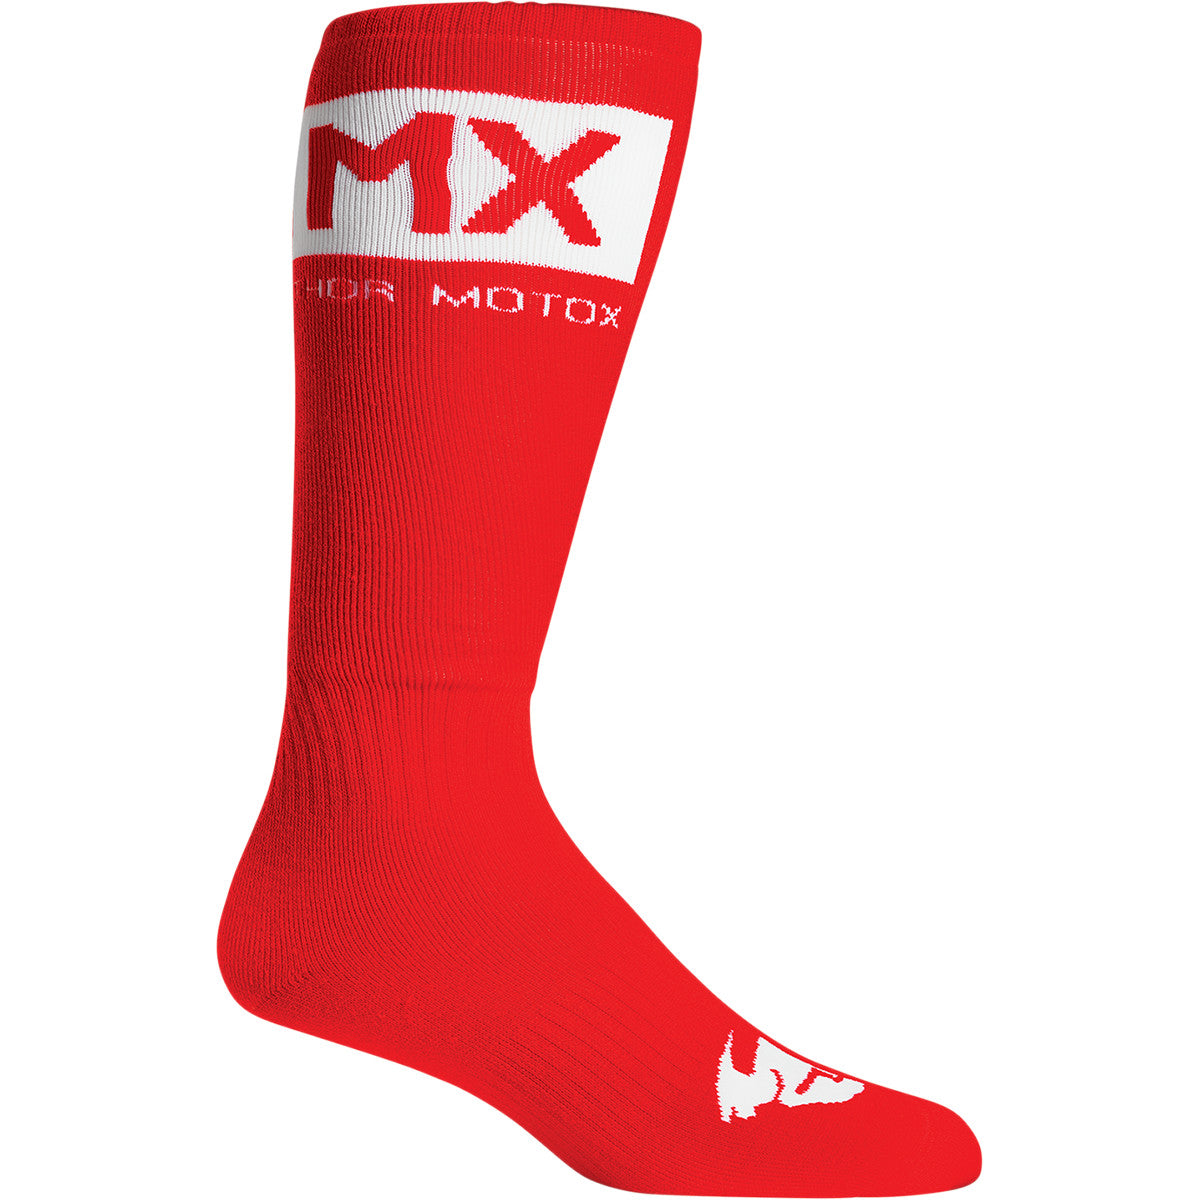 SOCK MX SOLID RD/WH 6-9